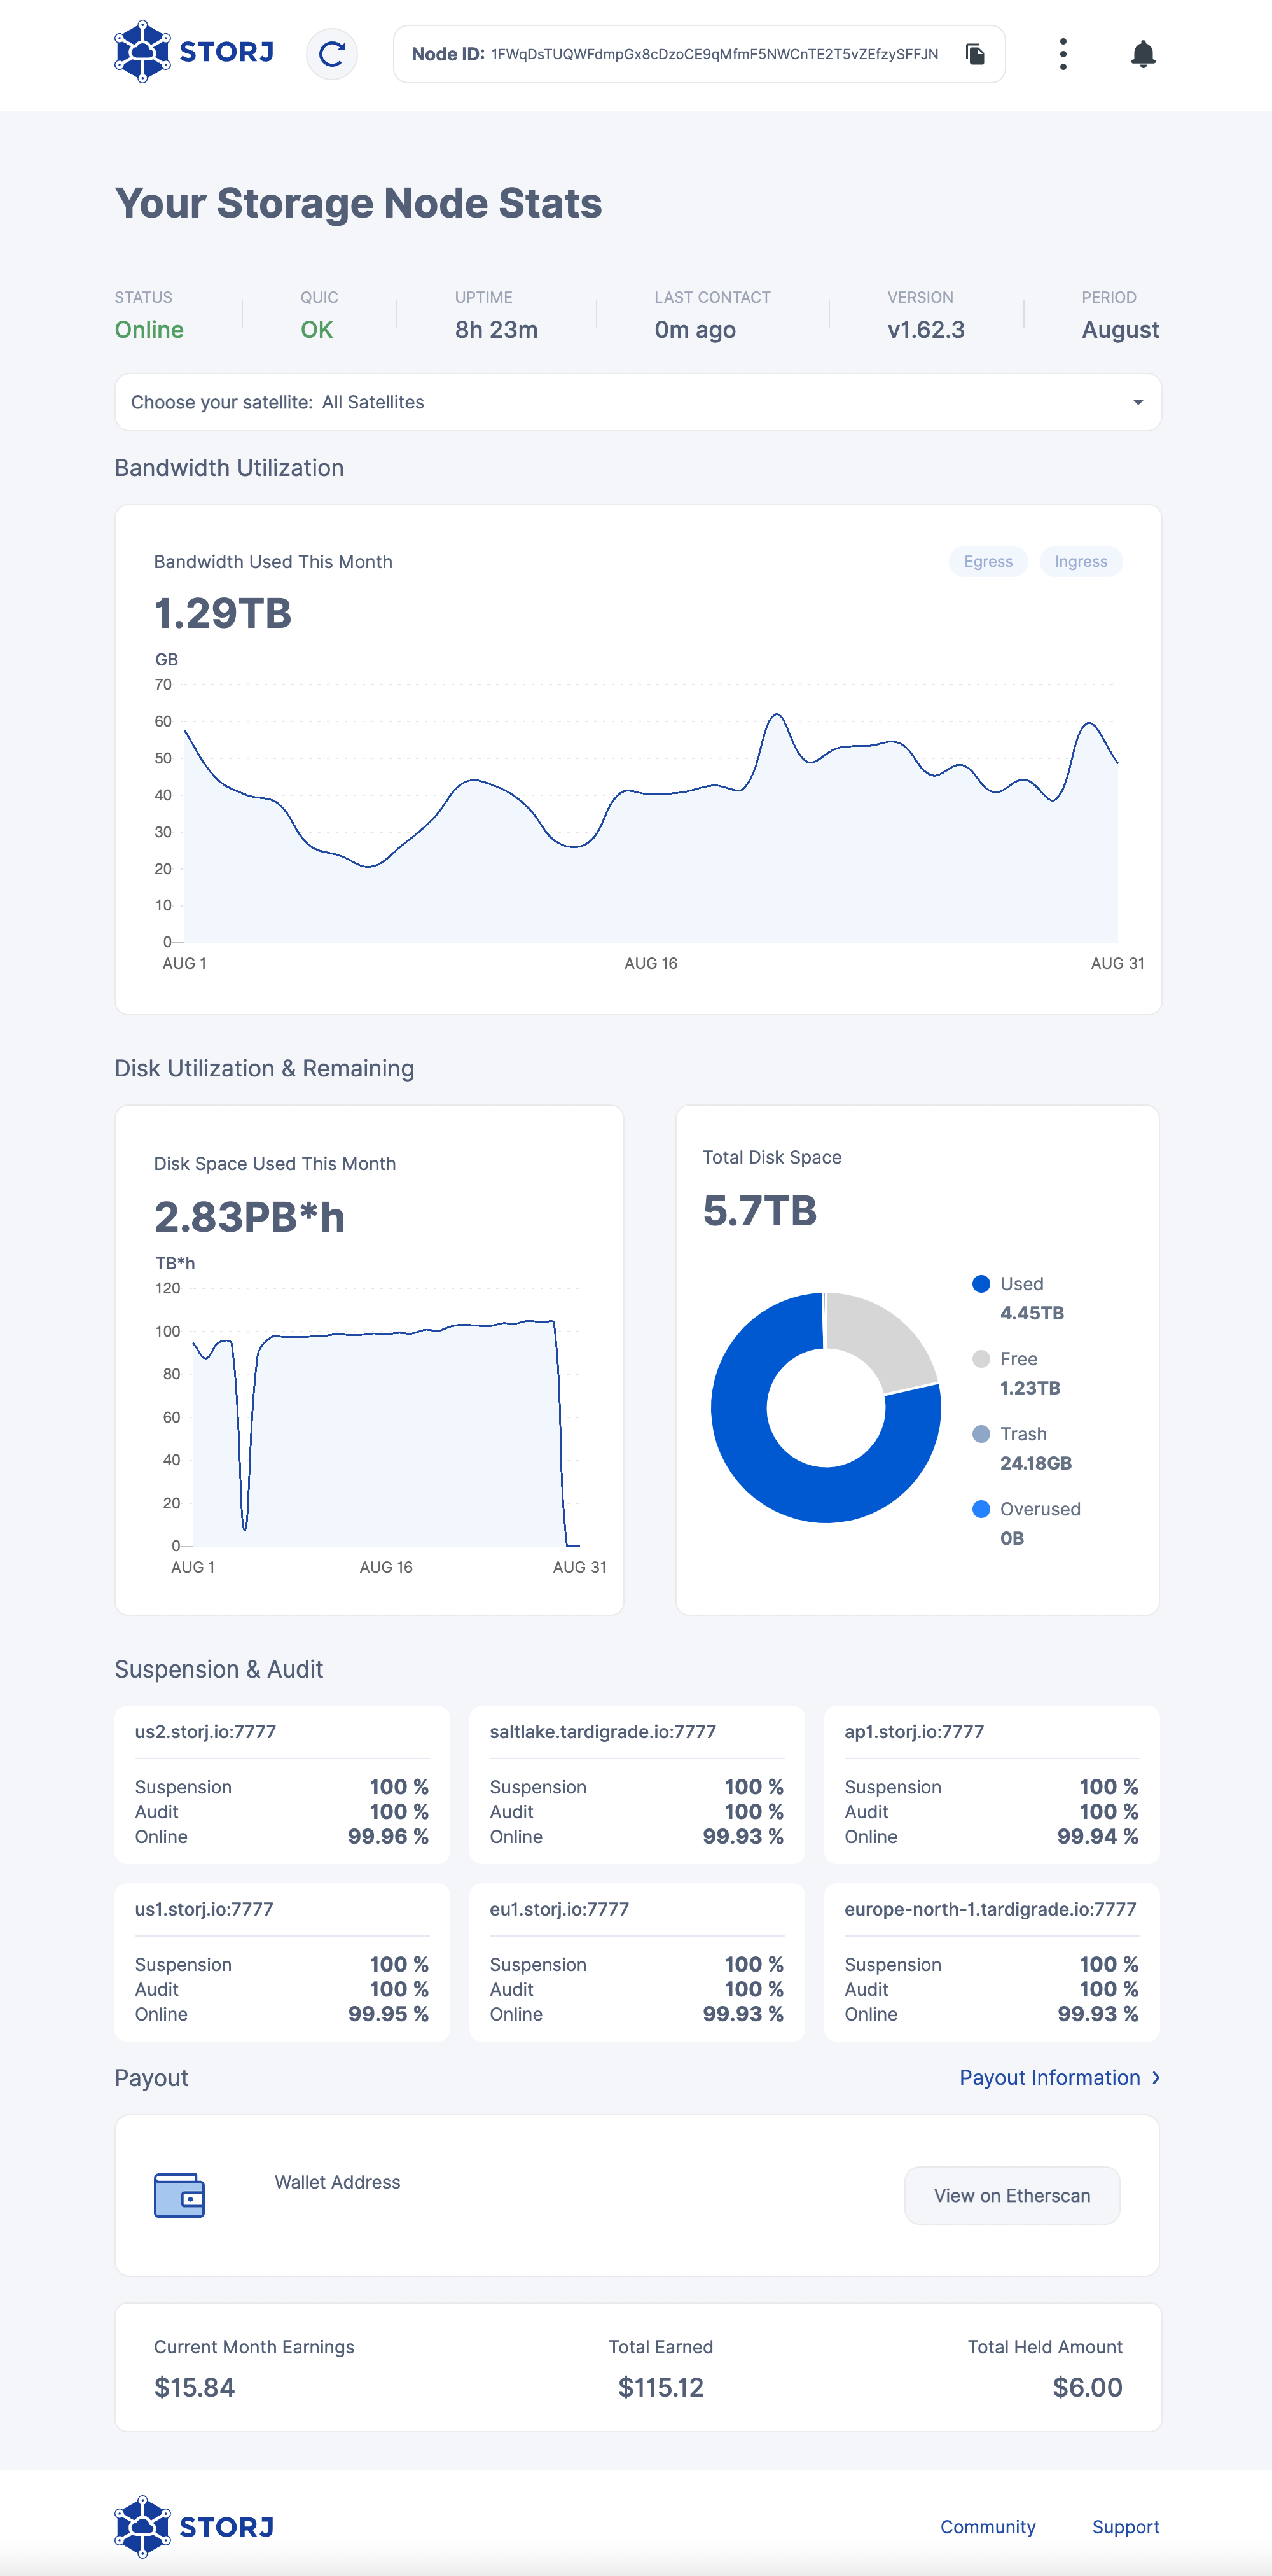 Storj Dashboard end of August 2022. Bandwidth used: 1.29 TB. Hours of storage used: 2.83 PB*h. Total available storage: 5.7 TB. Used storage: 4.45 TB. Free disk space: 1.23 TB. Recycle bin: 24.18 GB. Earnings this month: $15.85. Total earnings: $115.12. Withheld earnings: $6.